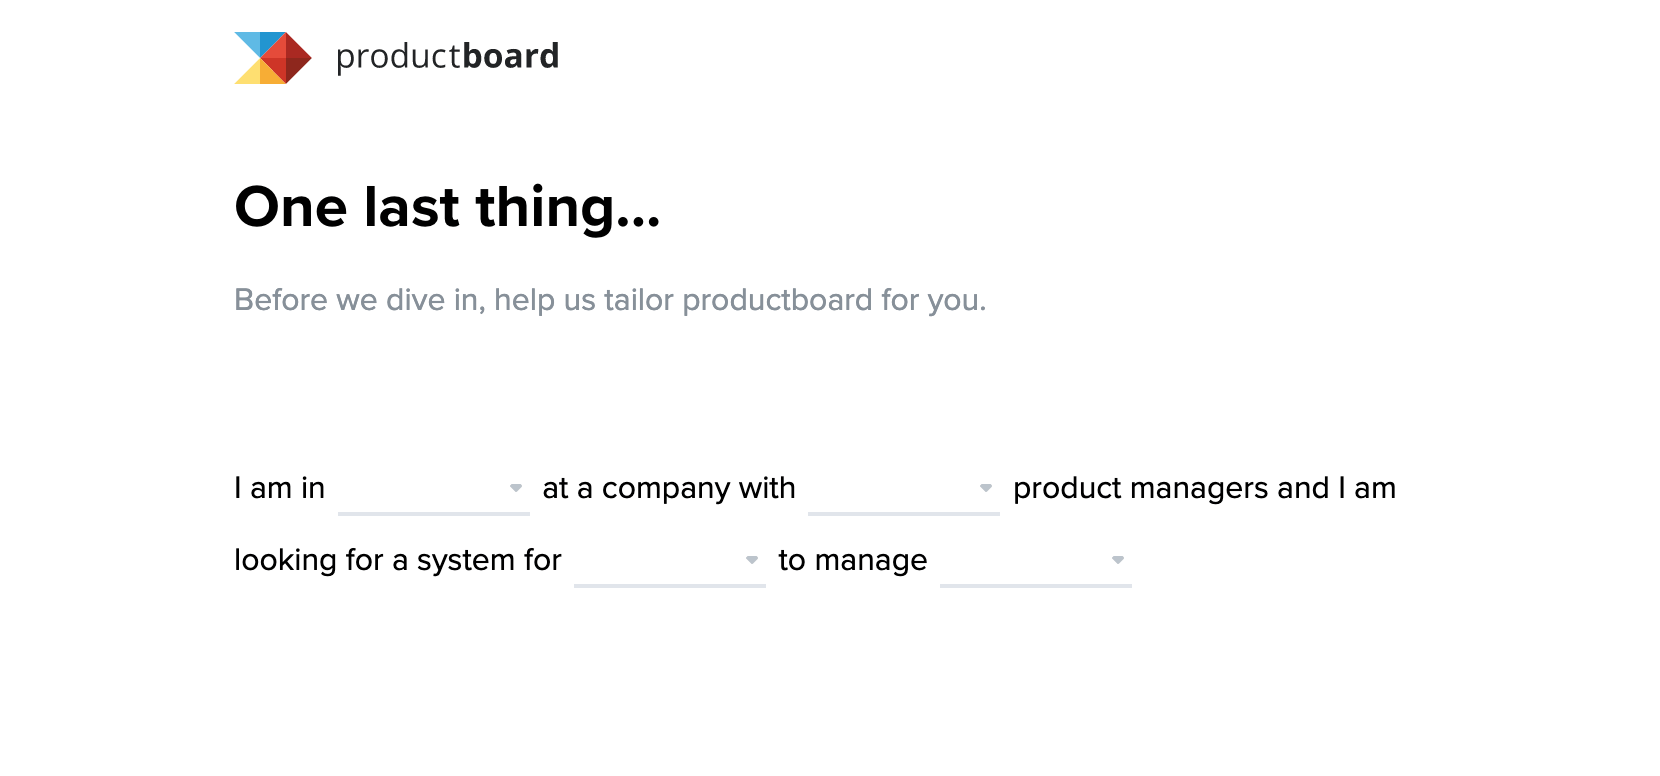 Productboard's welcome survey